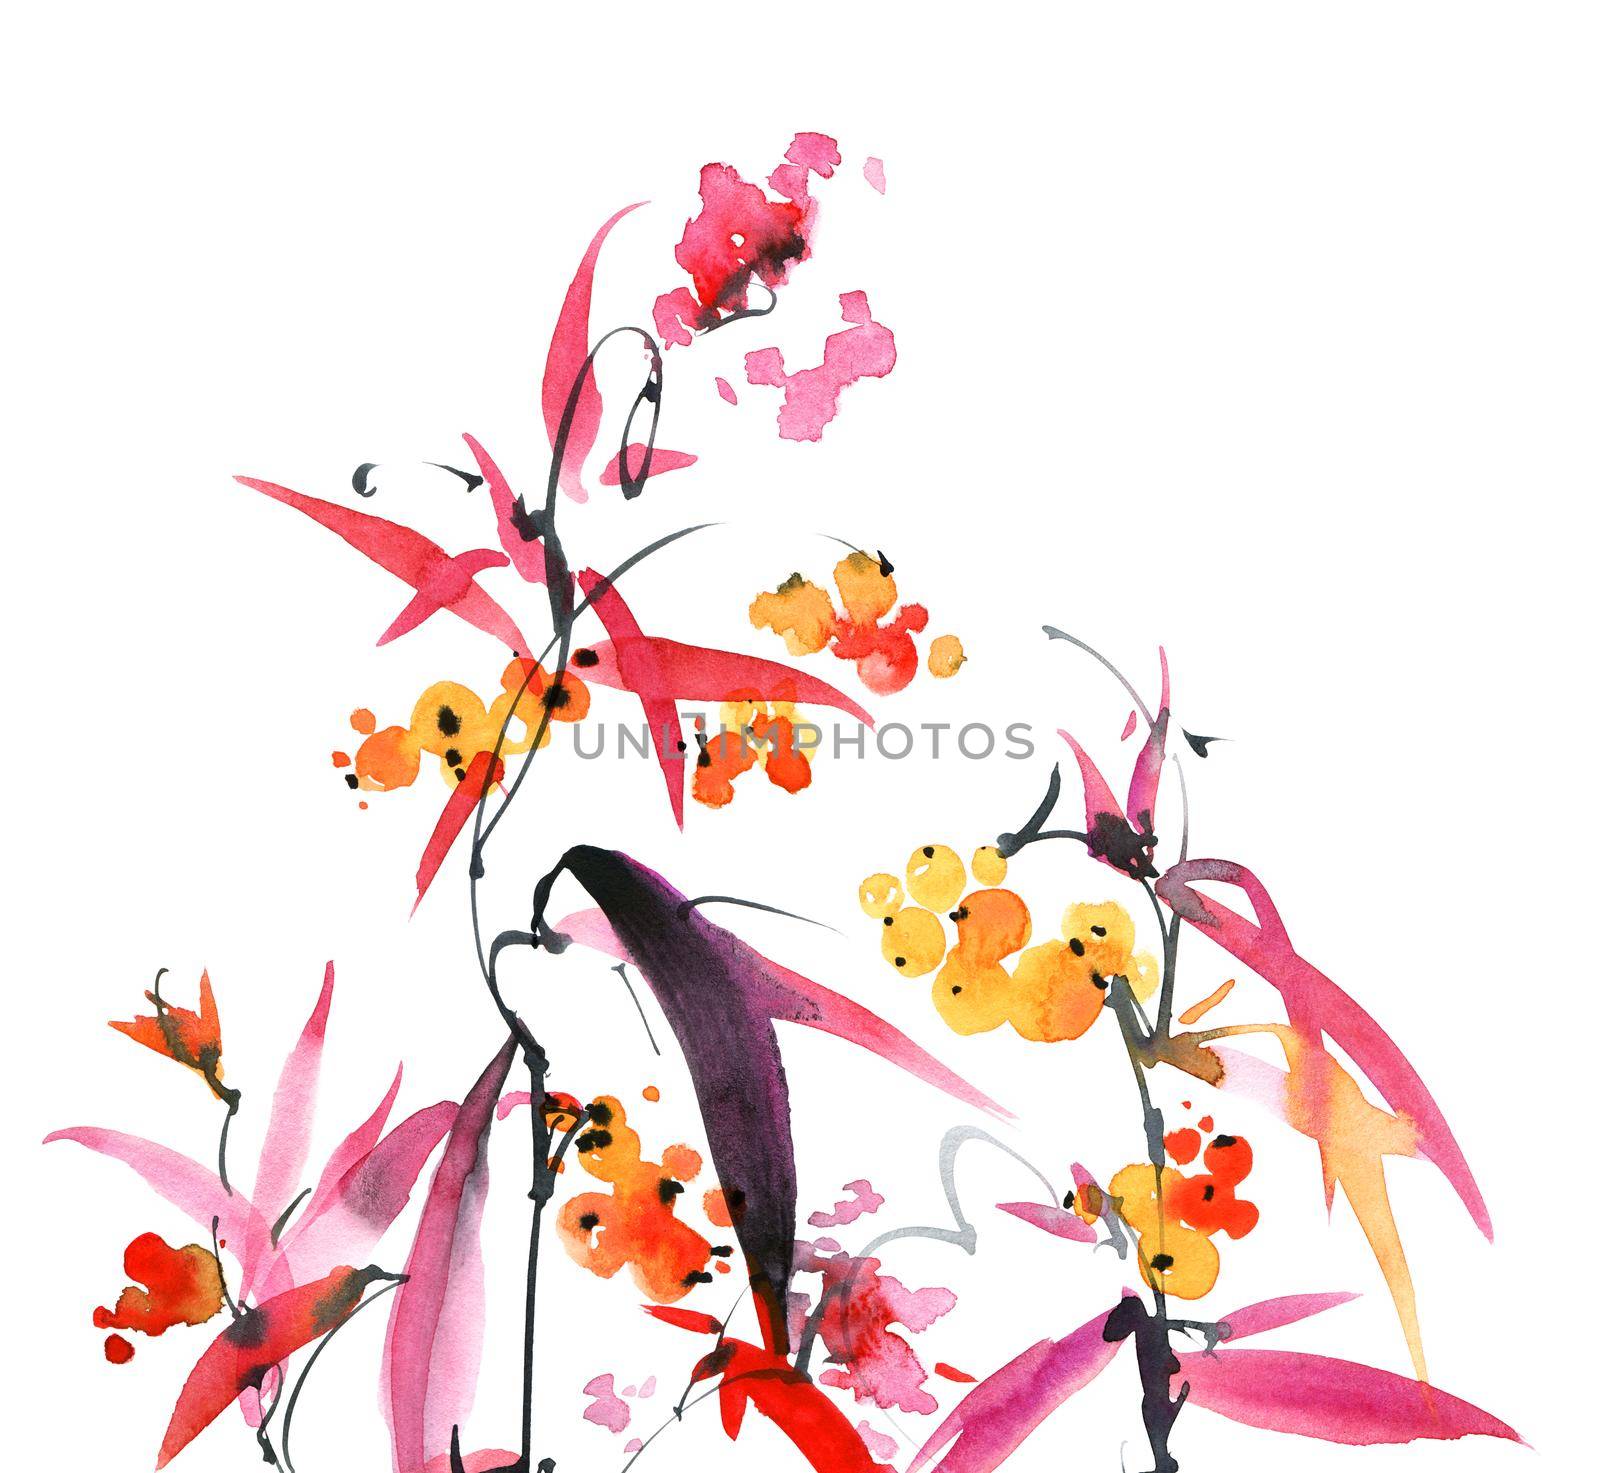 Watercolor and ink illustration - grassy plants with leaves, pink flowers, buds and berries. Sumi-e art.